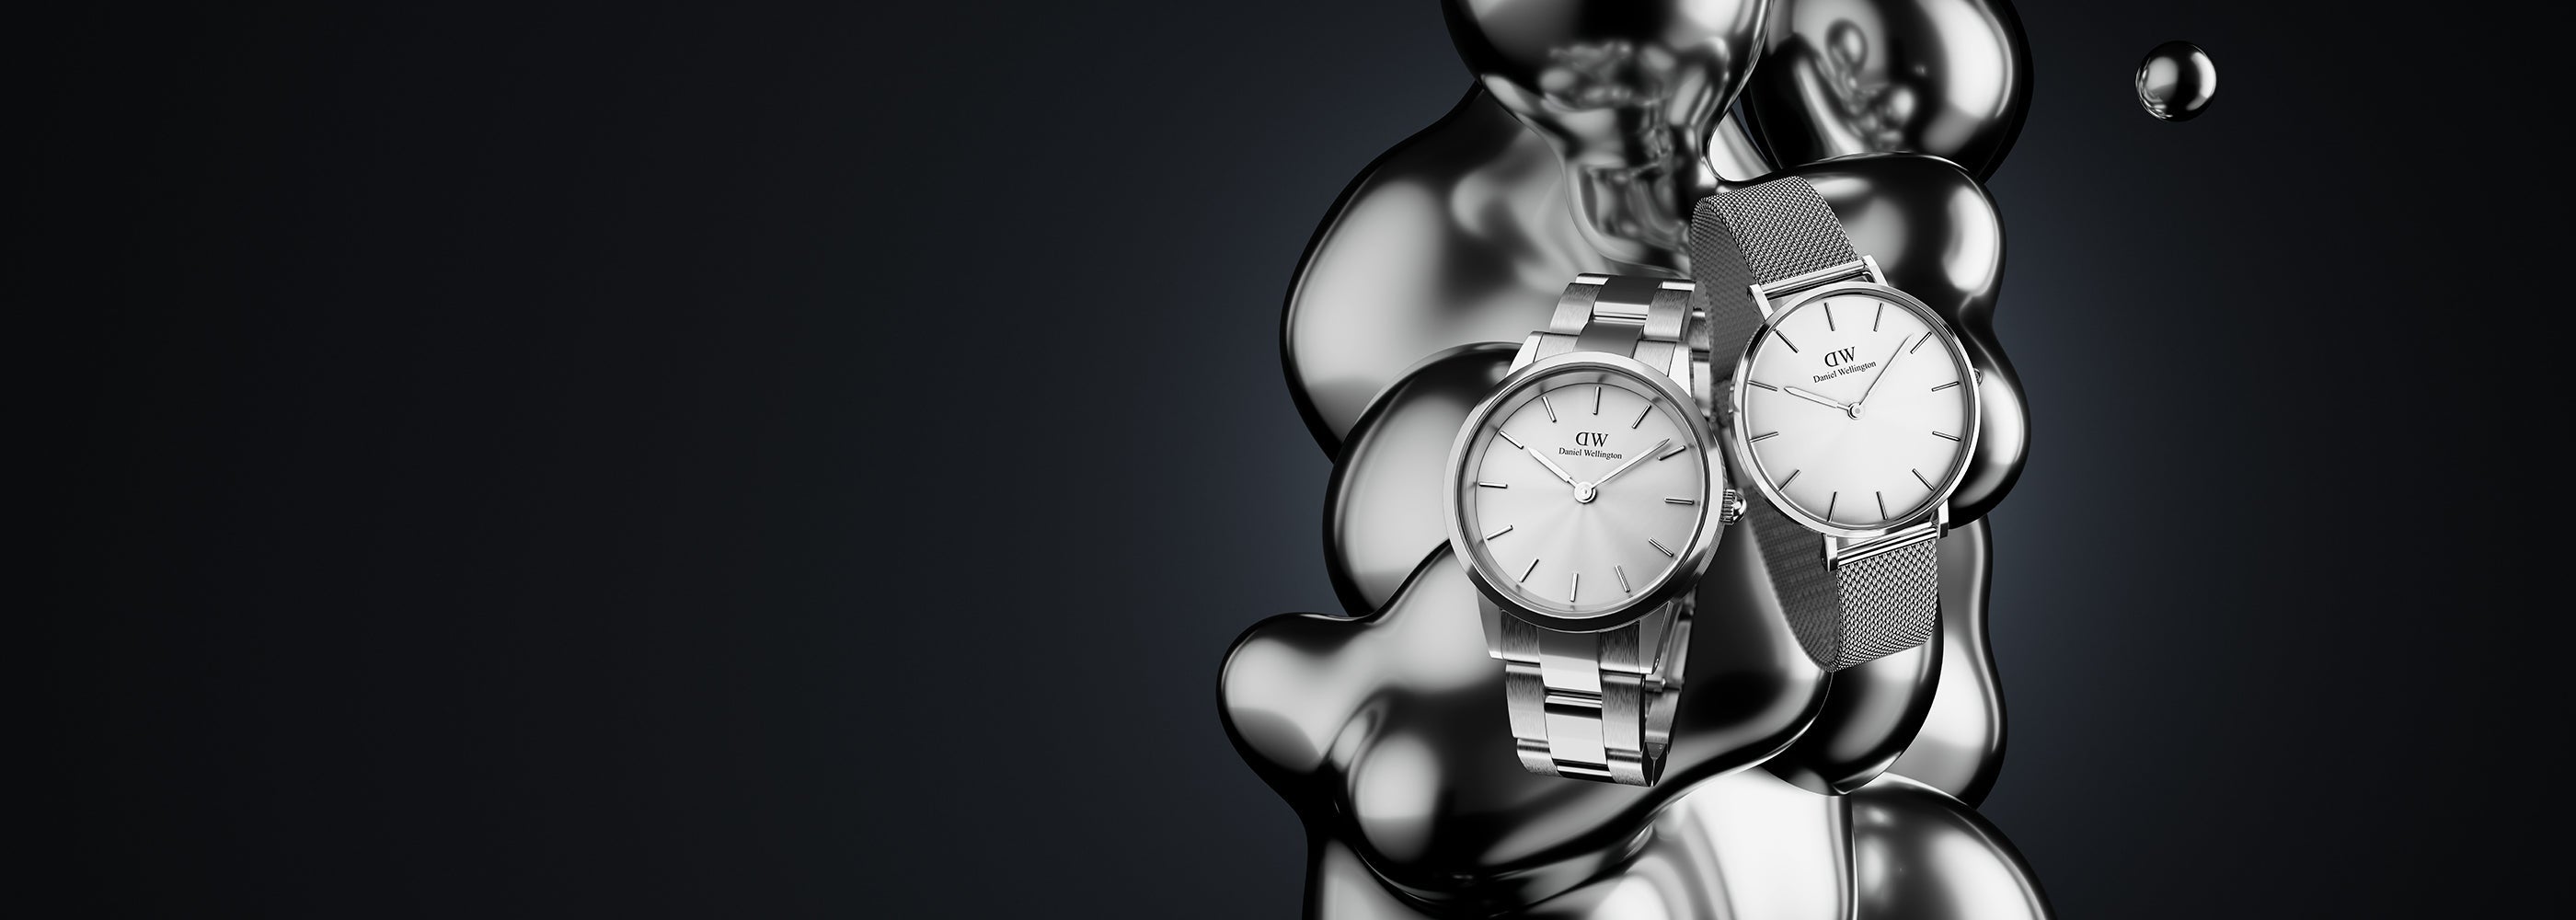 Dress Watches for Men: Elevate Your Style with Right Timepiece